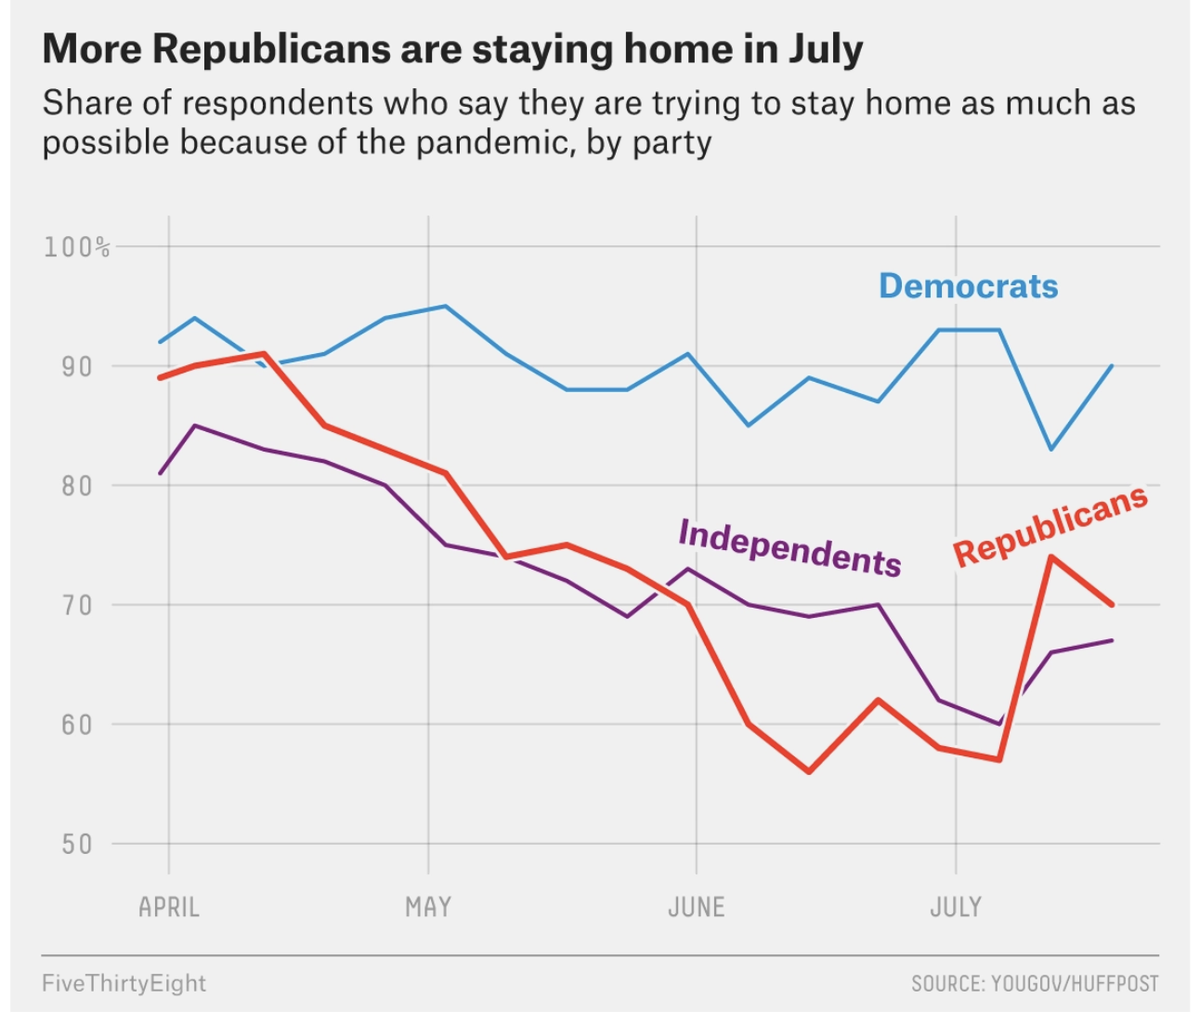 For those who still buy into the lives vs economy false dilemma, there are numerous indicators that show people are restricting their movement and their economic activity, regardless of party affiliation. Economy won't restart as long as folks fear for their lives (Yougov/538) 5/